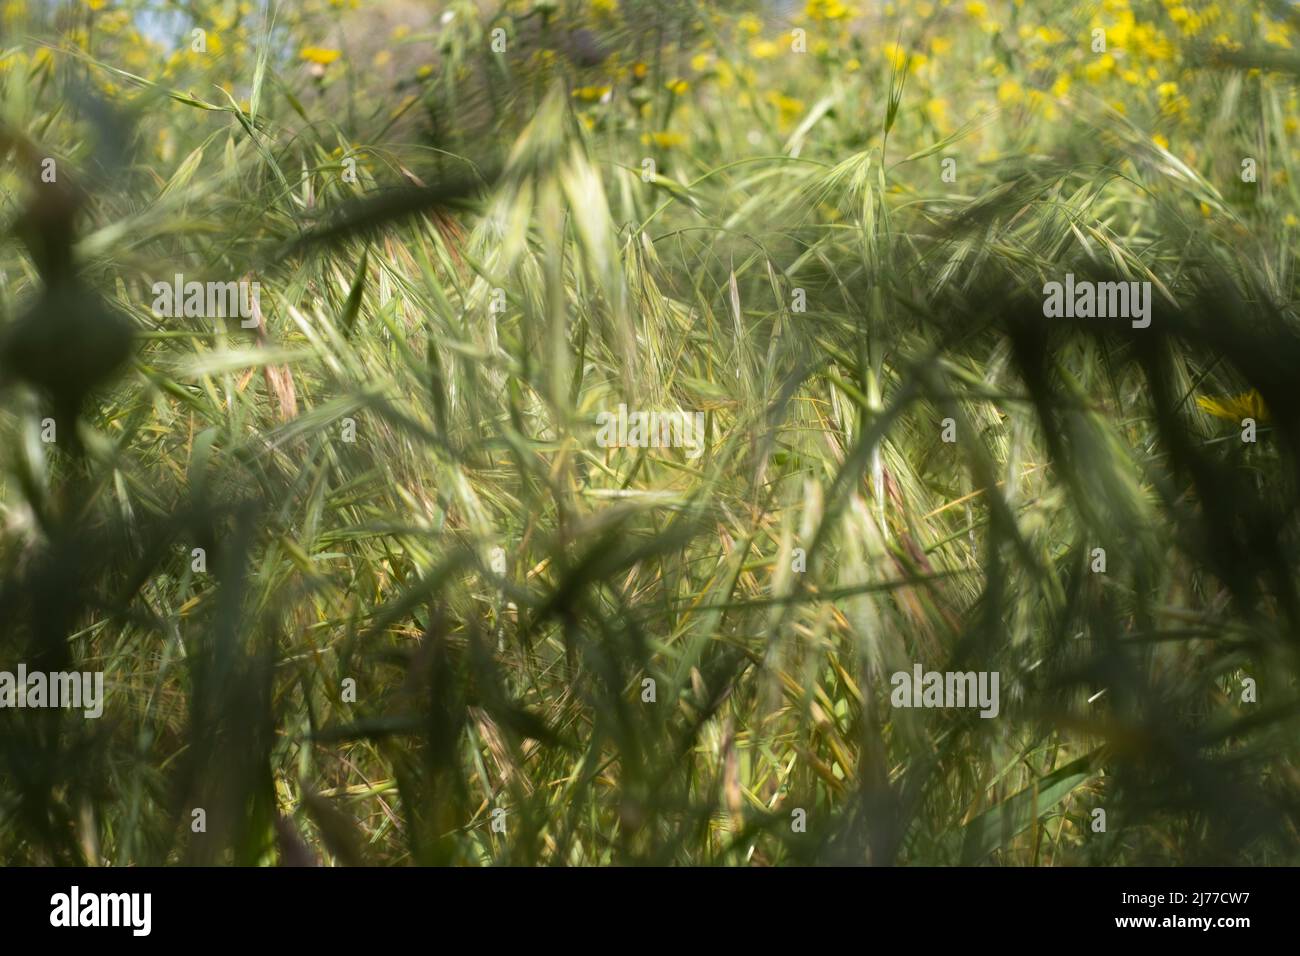 green field of wild grasses, which look like wheat.Tenerife.Spain Stock Photo